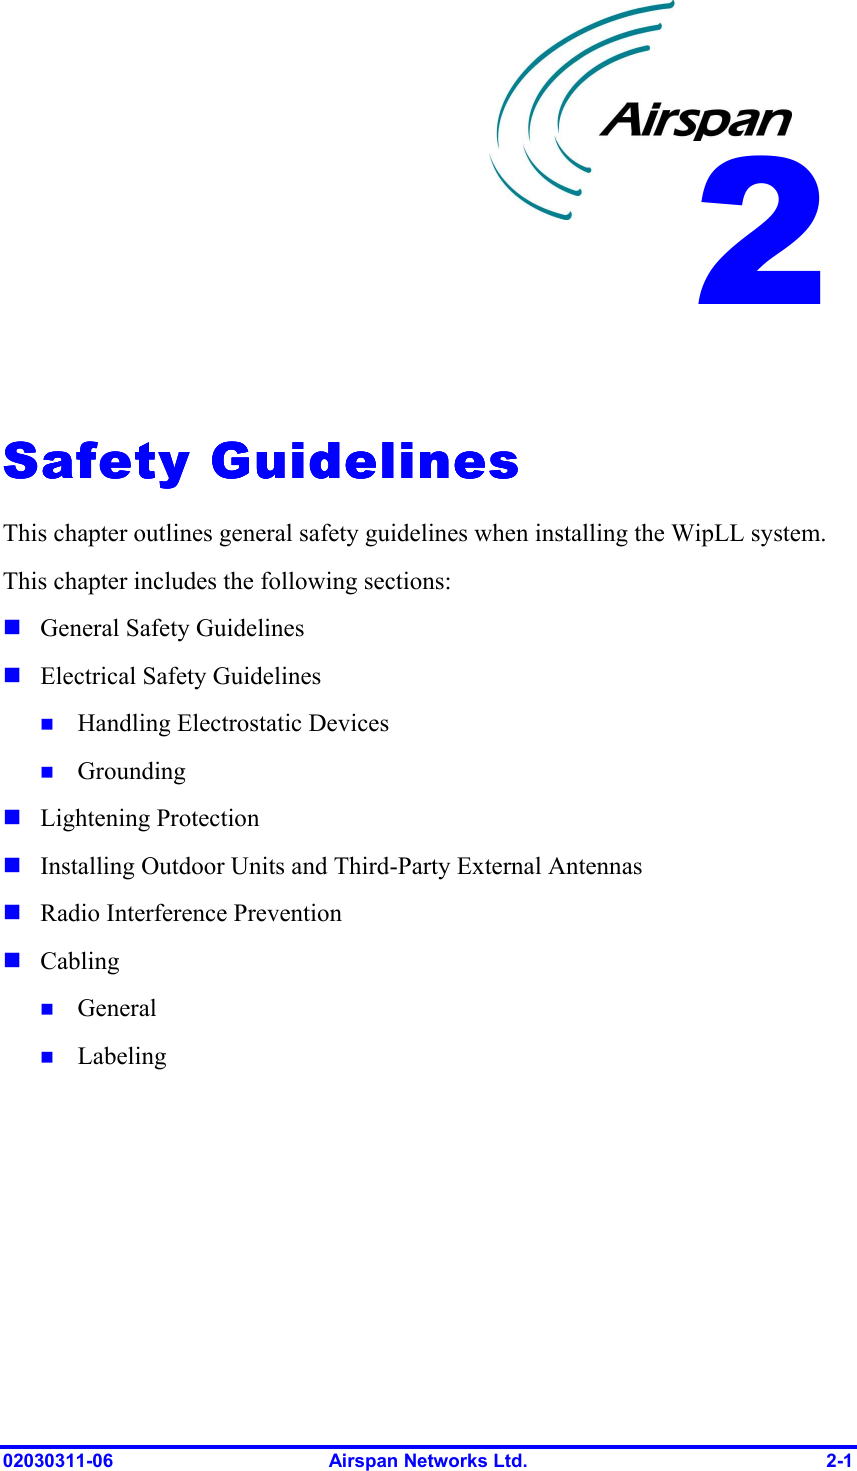  02030311-06  Airspan Networks Ltd.  2-1   Safety GuidelinesSafety GuidelinesSafety GuidelinesSafety Guidelines    This chapter outlines general safety guidelines when installing the WipLL system. This chapter includes the following sections: ! General Safety Guidelines ! Electrical Safety Guidelines !  Handling Electrostatic Devices !  Grounding  ! Lightening Protection ! Installing Outdoor Units and Third-Party External Antennas ! Radio Interference Prevention ! Cabling !  General !  Labeling 2 